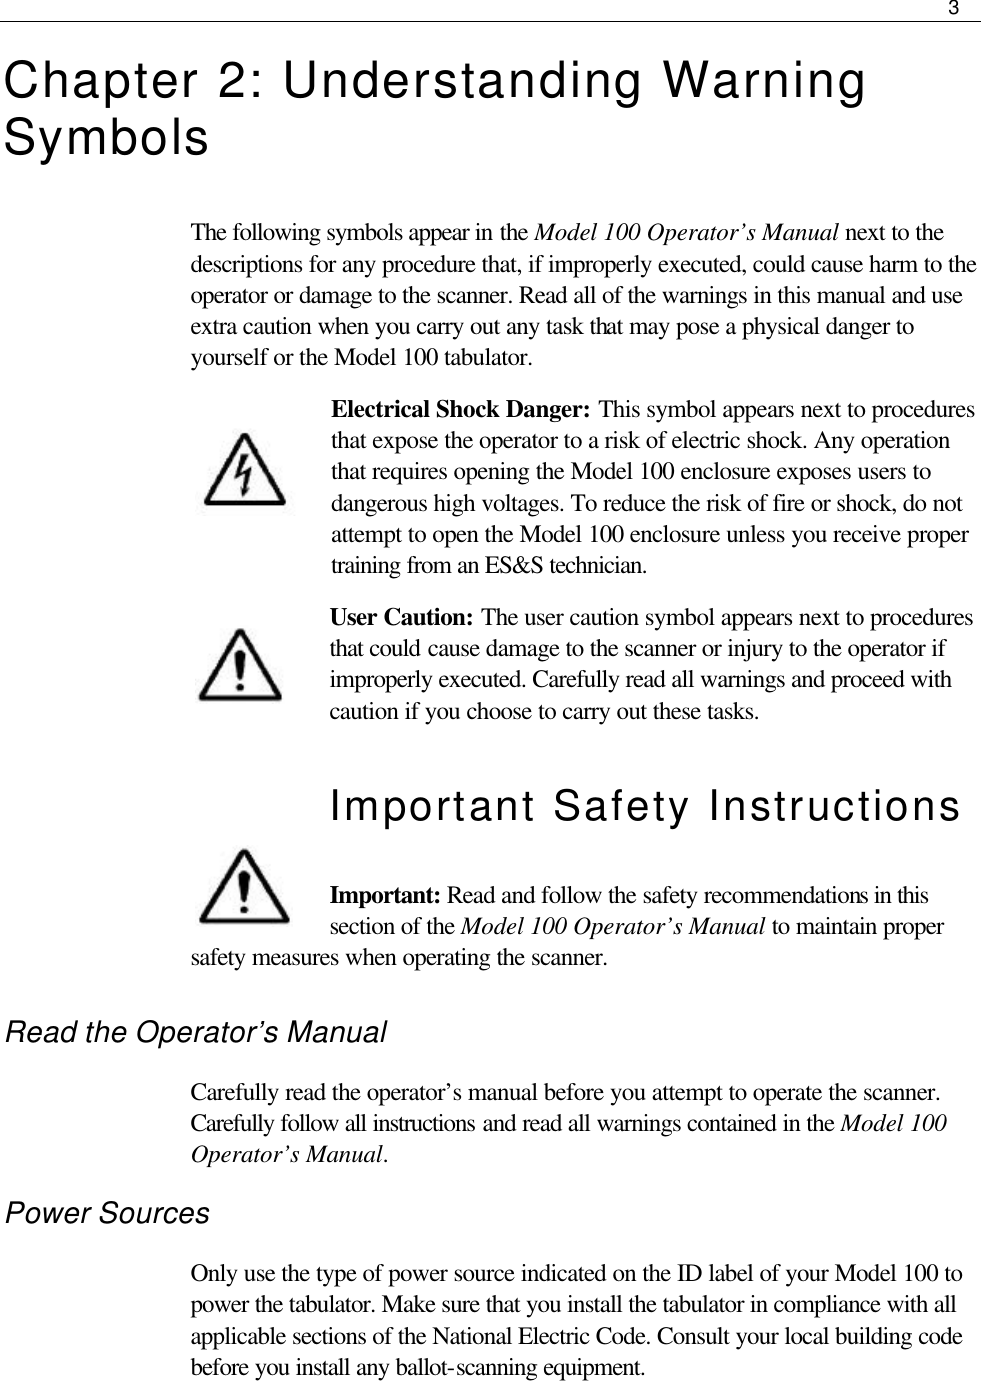     3  Chapter 2: Understanding Warning Symbols The following symbols appear in the Model 100 Operator’s Manual next to the descriptions for any procedure that, if improperly executed, could cause harm to the operator or damage to the scanner. Read all of the warnings in this manual and use extra caution when you carry out any task that may pose a physical danger to yourself or the Model 100 tabulator.  Electrical Shock Danger: This symbol appears next to procedures that expose the operator to a risk of electric shock. Any operation that requires opening the Model 100 enclosure exposes users to dangerous high voltages. To reduce the risk of fire or shock, do not attempt to open the Model 100 enclosure unless you receive proper training from an ES&amp;S technician. User Caution: The user caution symbol appears next to procedures that could cause damage to the scanner or injury to the operator if improperly executed. Carefully read all warnings and proceed with caution if you choose to carry out these tasks. Important Safety Instructions  Important: Read and follow the safety recommendations in this section of the Model 100 Operator’s Manual to maintain proper safety measures when operating the scanner. Read the Operator’s Manual Carefully read the operator’s manual before you attempt to operate the scanner. Carefully follow all instructions and read all warnings contained in the Model 100 Operator’s Manual. Power Sources Only use the type of power source indicated on the ID label of your Model 100 to power the tabulator. Make sure that you install the tabulator in compliance with all applicable sections of the National Electric Code. Consult your local building code before you install any ballot-scanning equipment.    